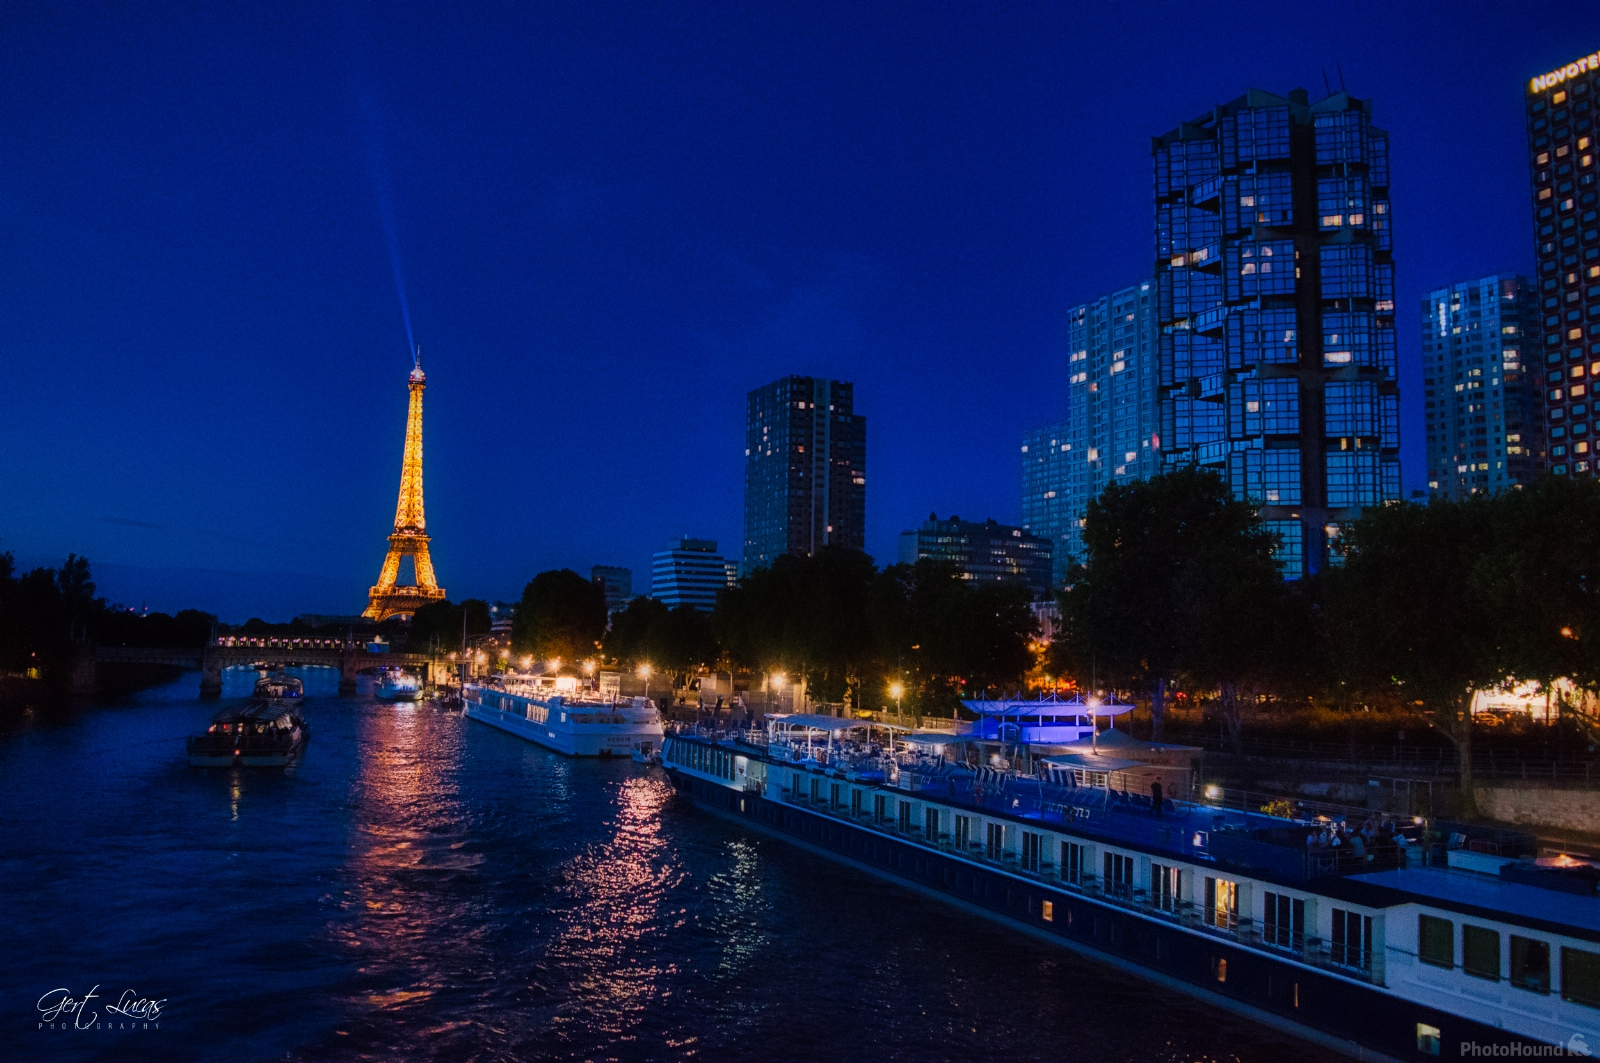 Image of Eiffel Tower from Pont de Grenelle by Gert Lucas